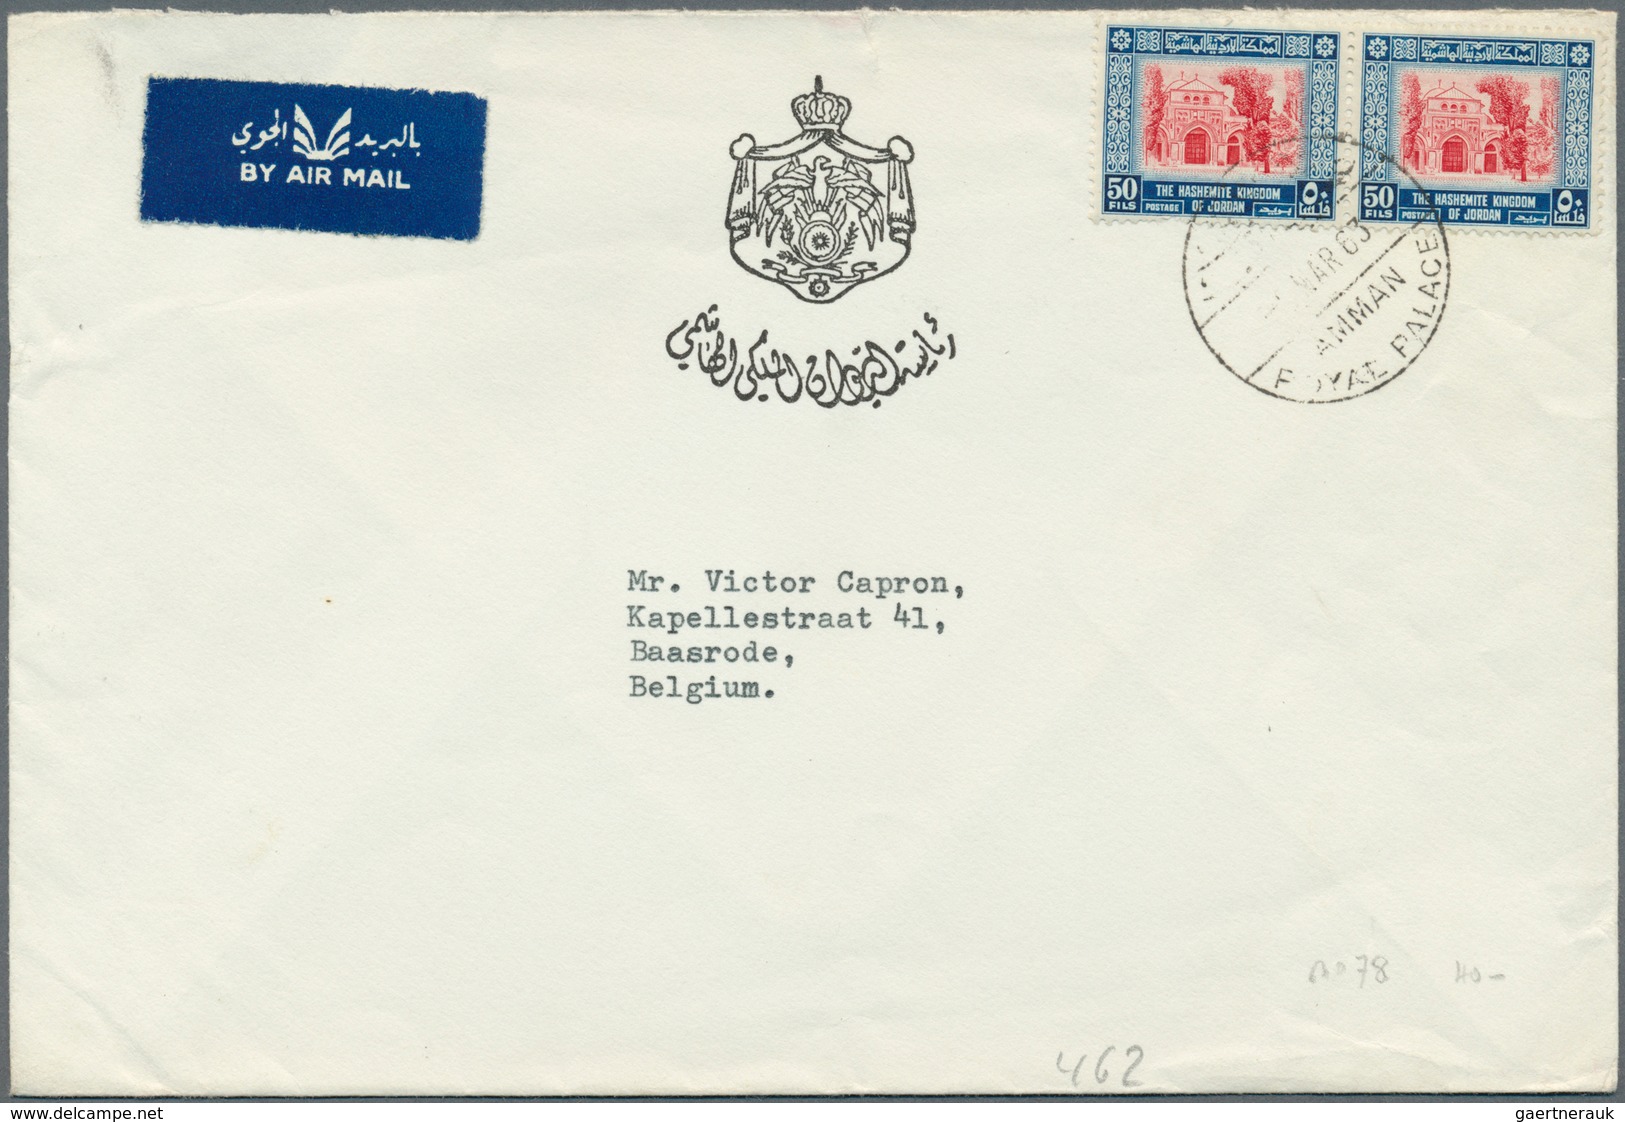 23294 Jordanien: 1948 - 1979, 37 covers, nice collection of covers and some postal stationery, good franki